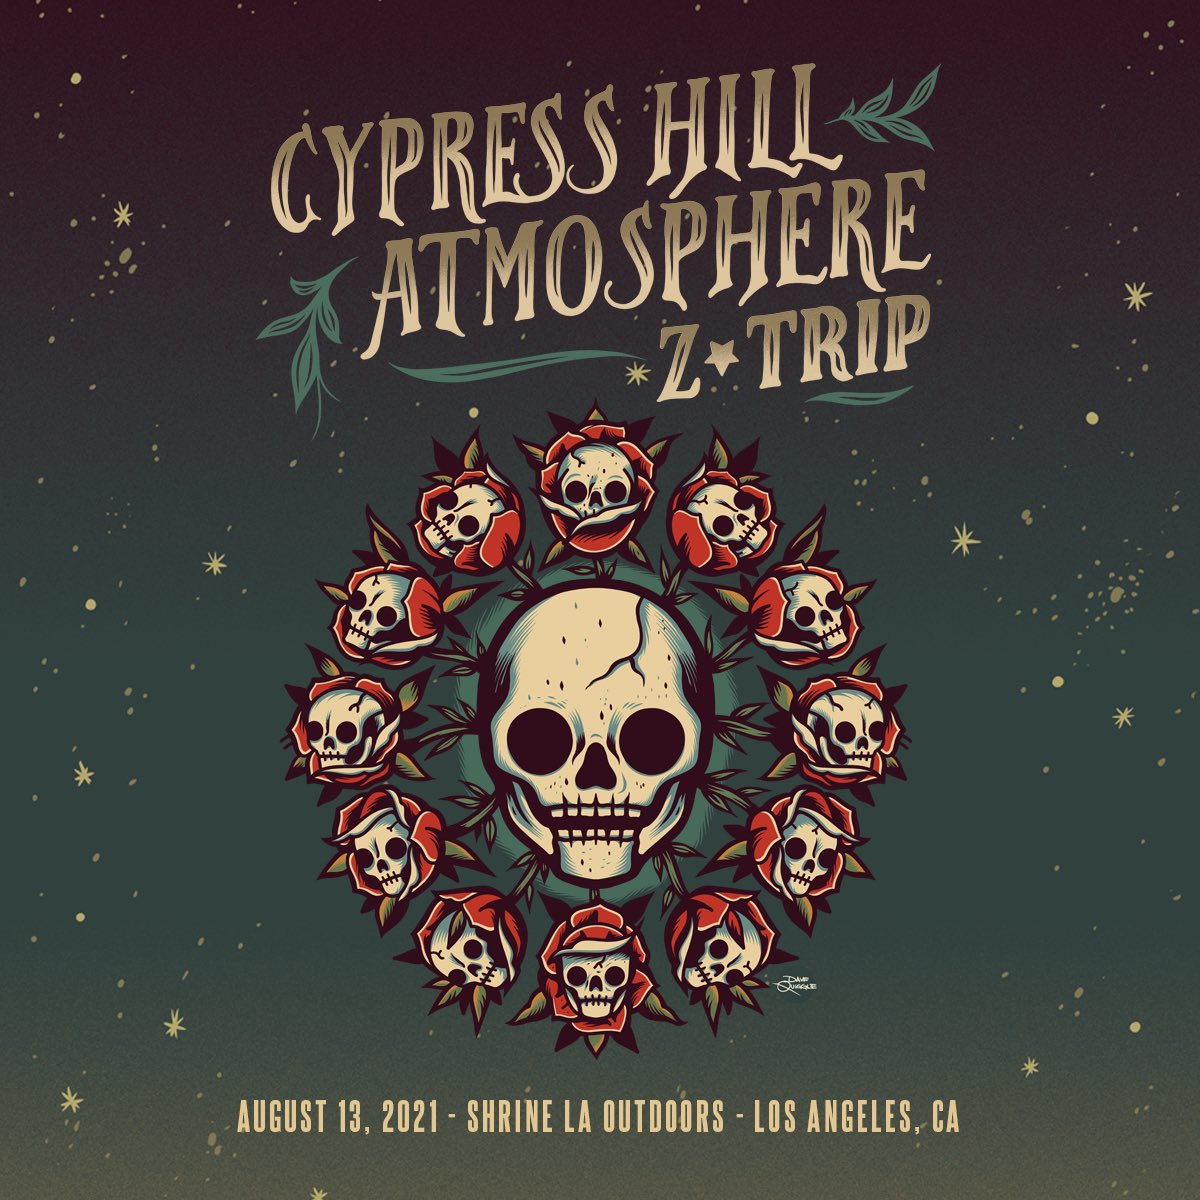 cypress hill x atmosphere